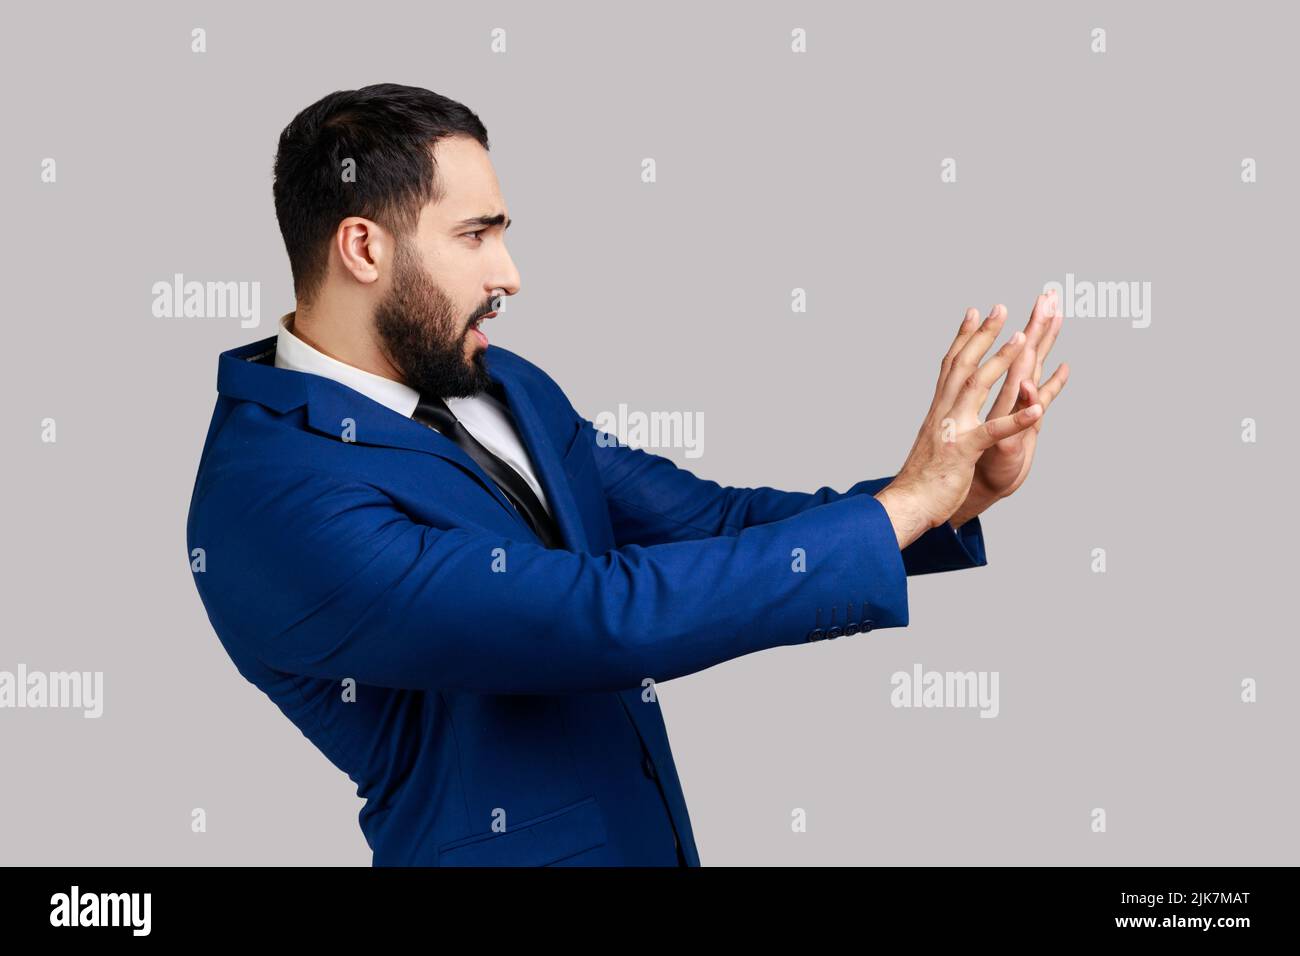 Side view of bearded man raising hands from sudden fear, looking terrified, scared to death, horror facial expression, wearing official style suit. Indoor studio shot isolated on gray background. Stock Photo